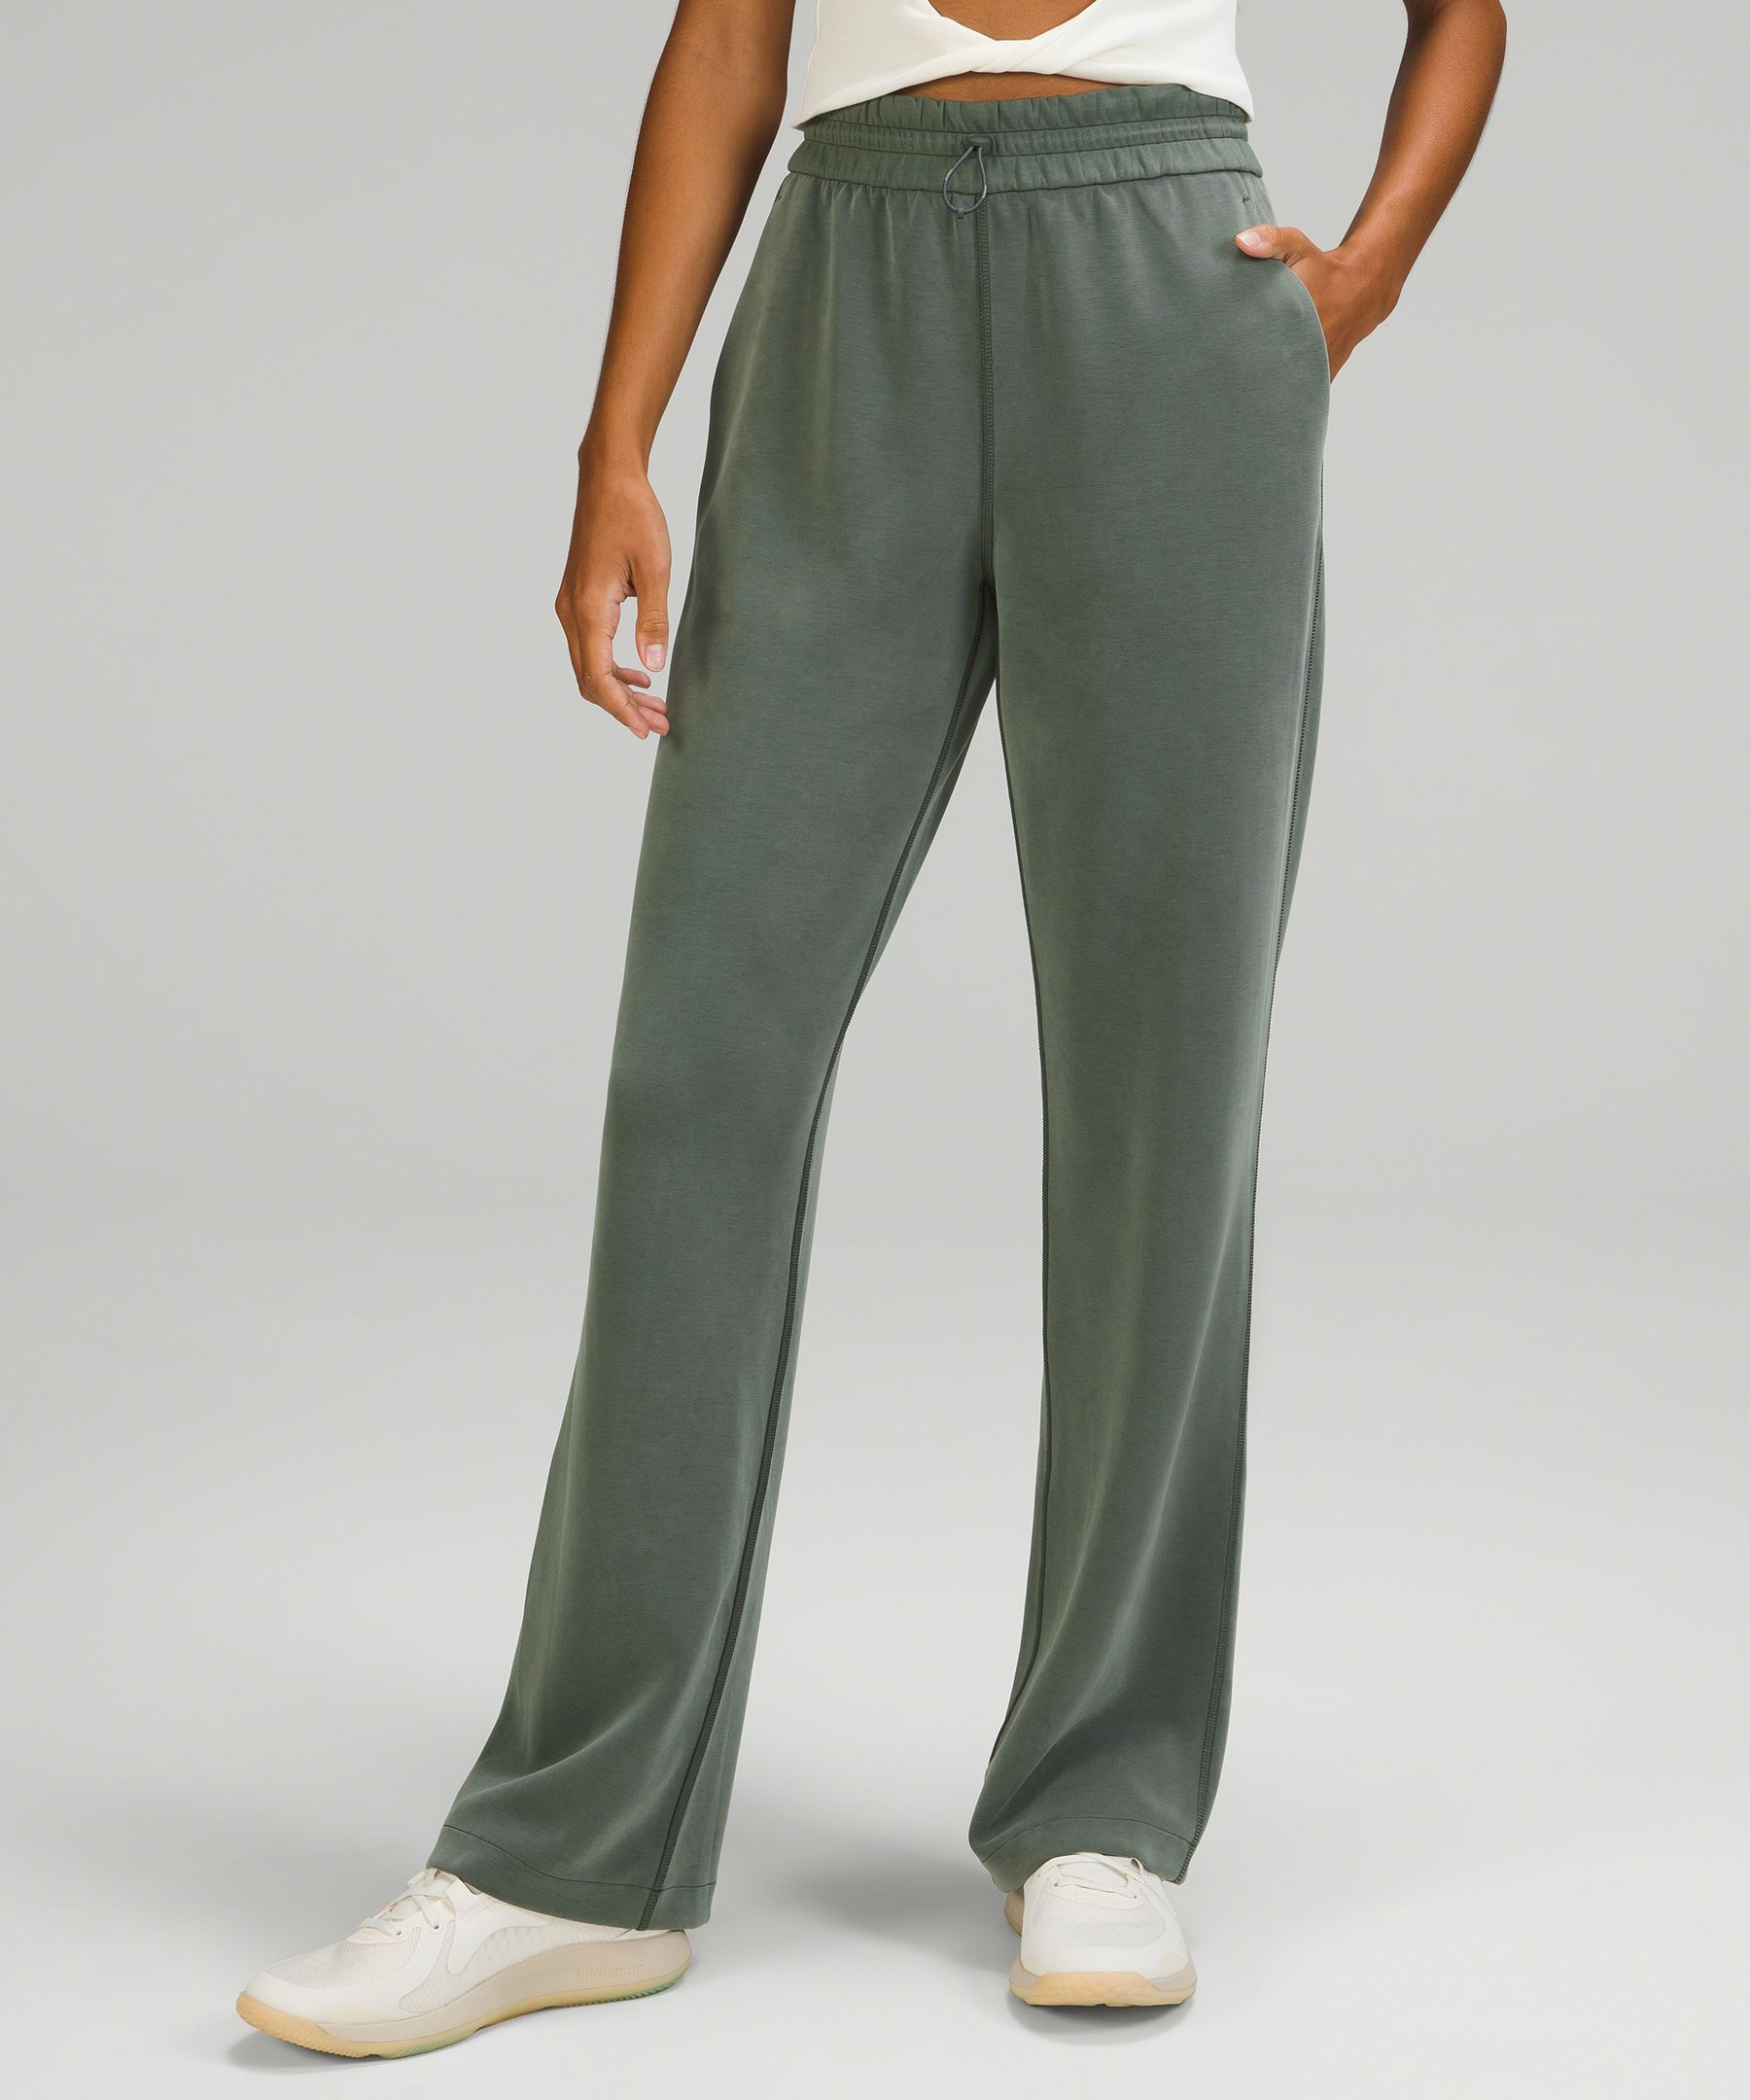 Lululemon Softstreme High-rise Pants In Smoked Spruce